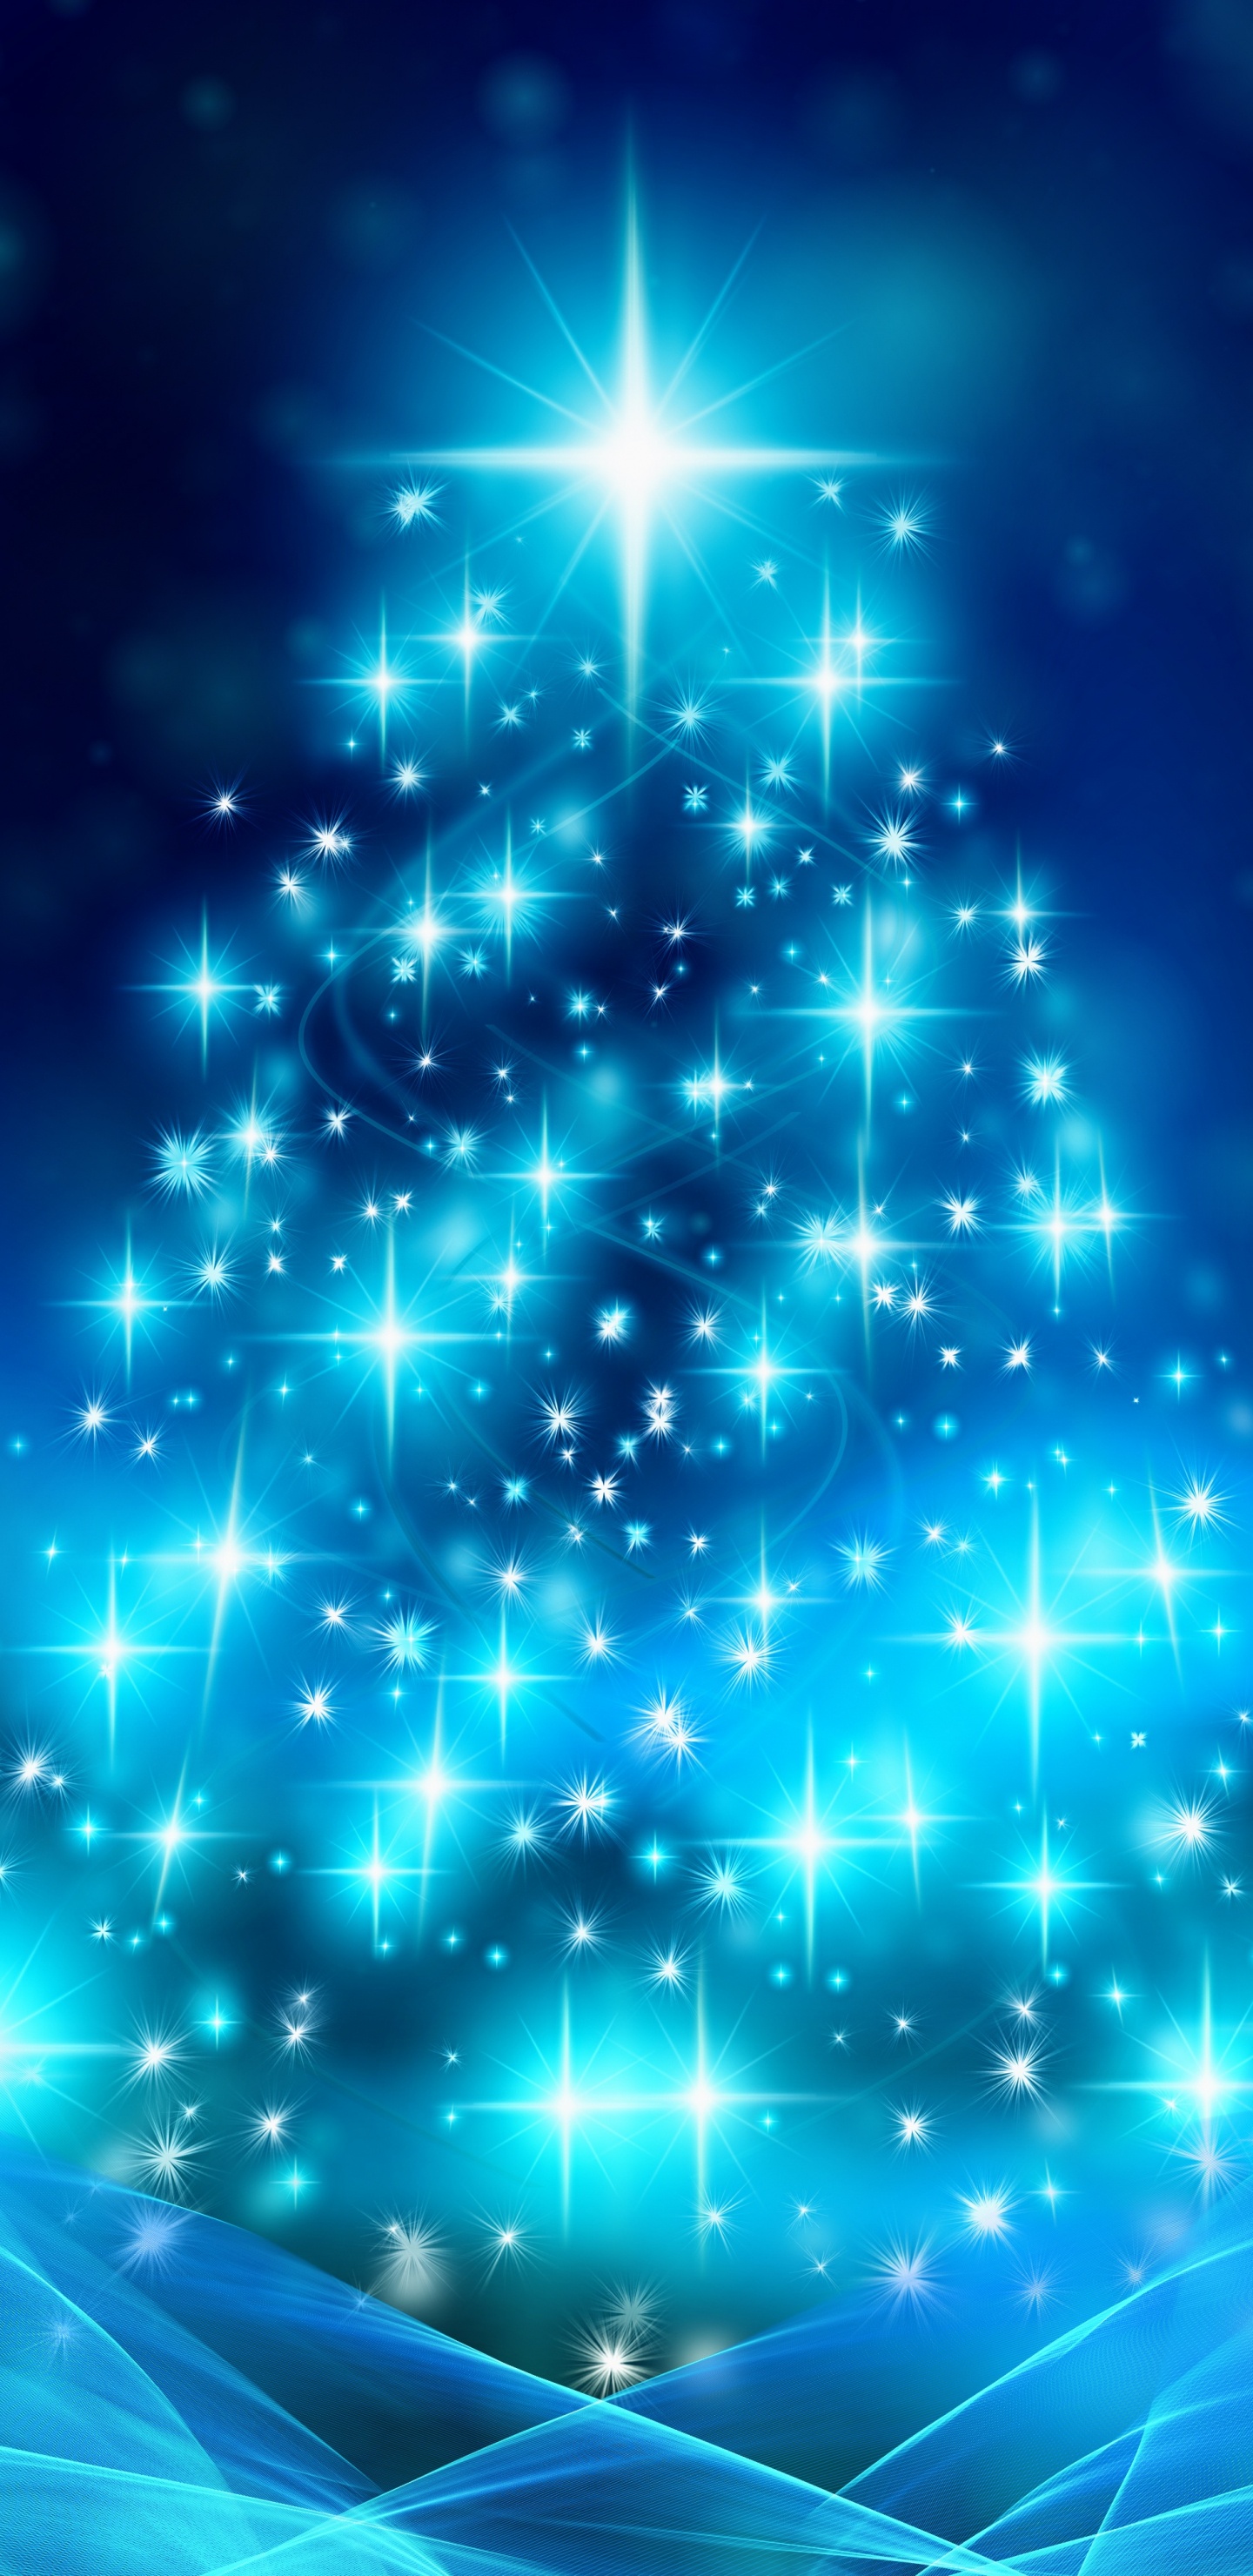 Christmas Day, Christmas Tree, Christmas Decoration, Blue, Tree. Wallpaper in 1440x2960 Resolution